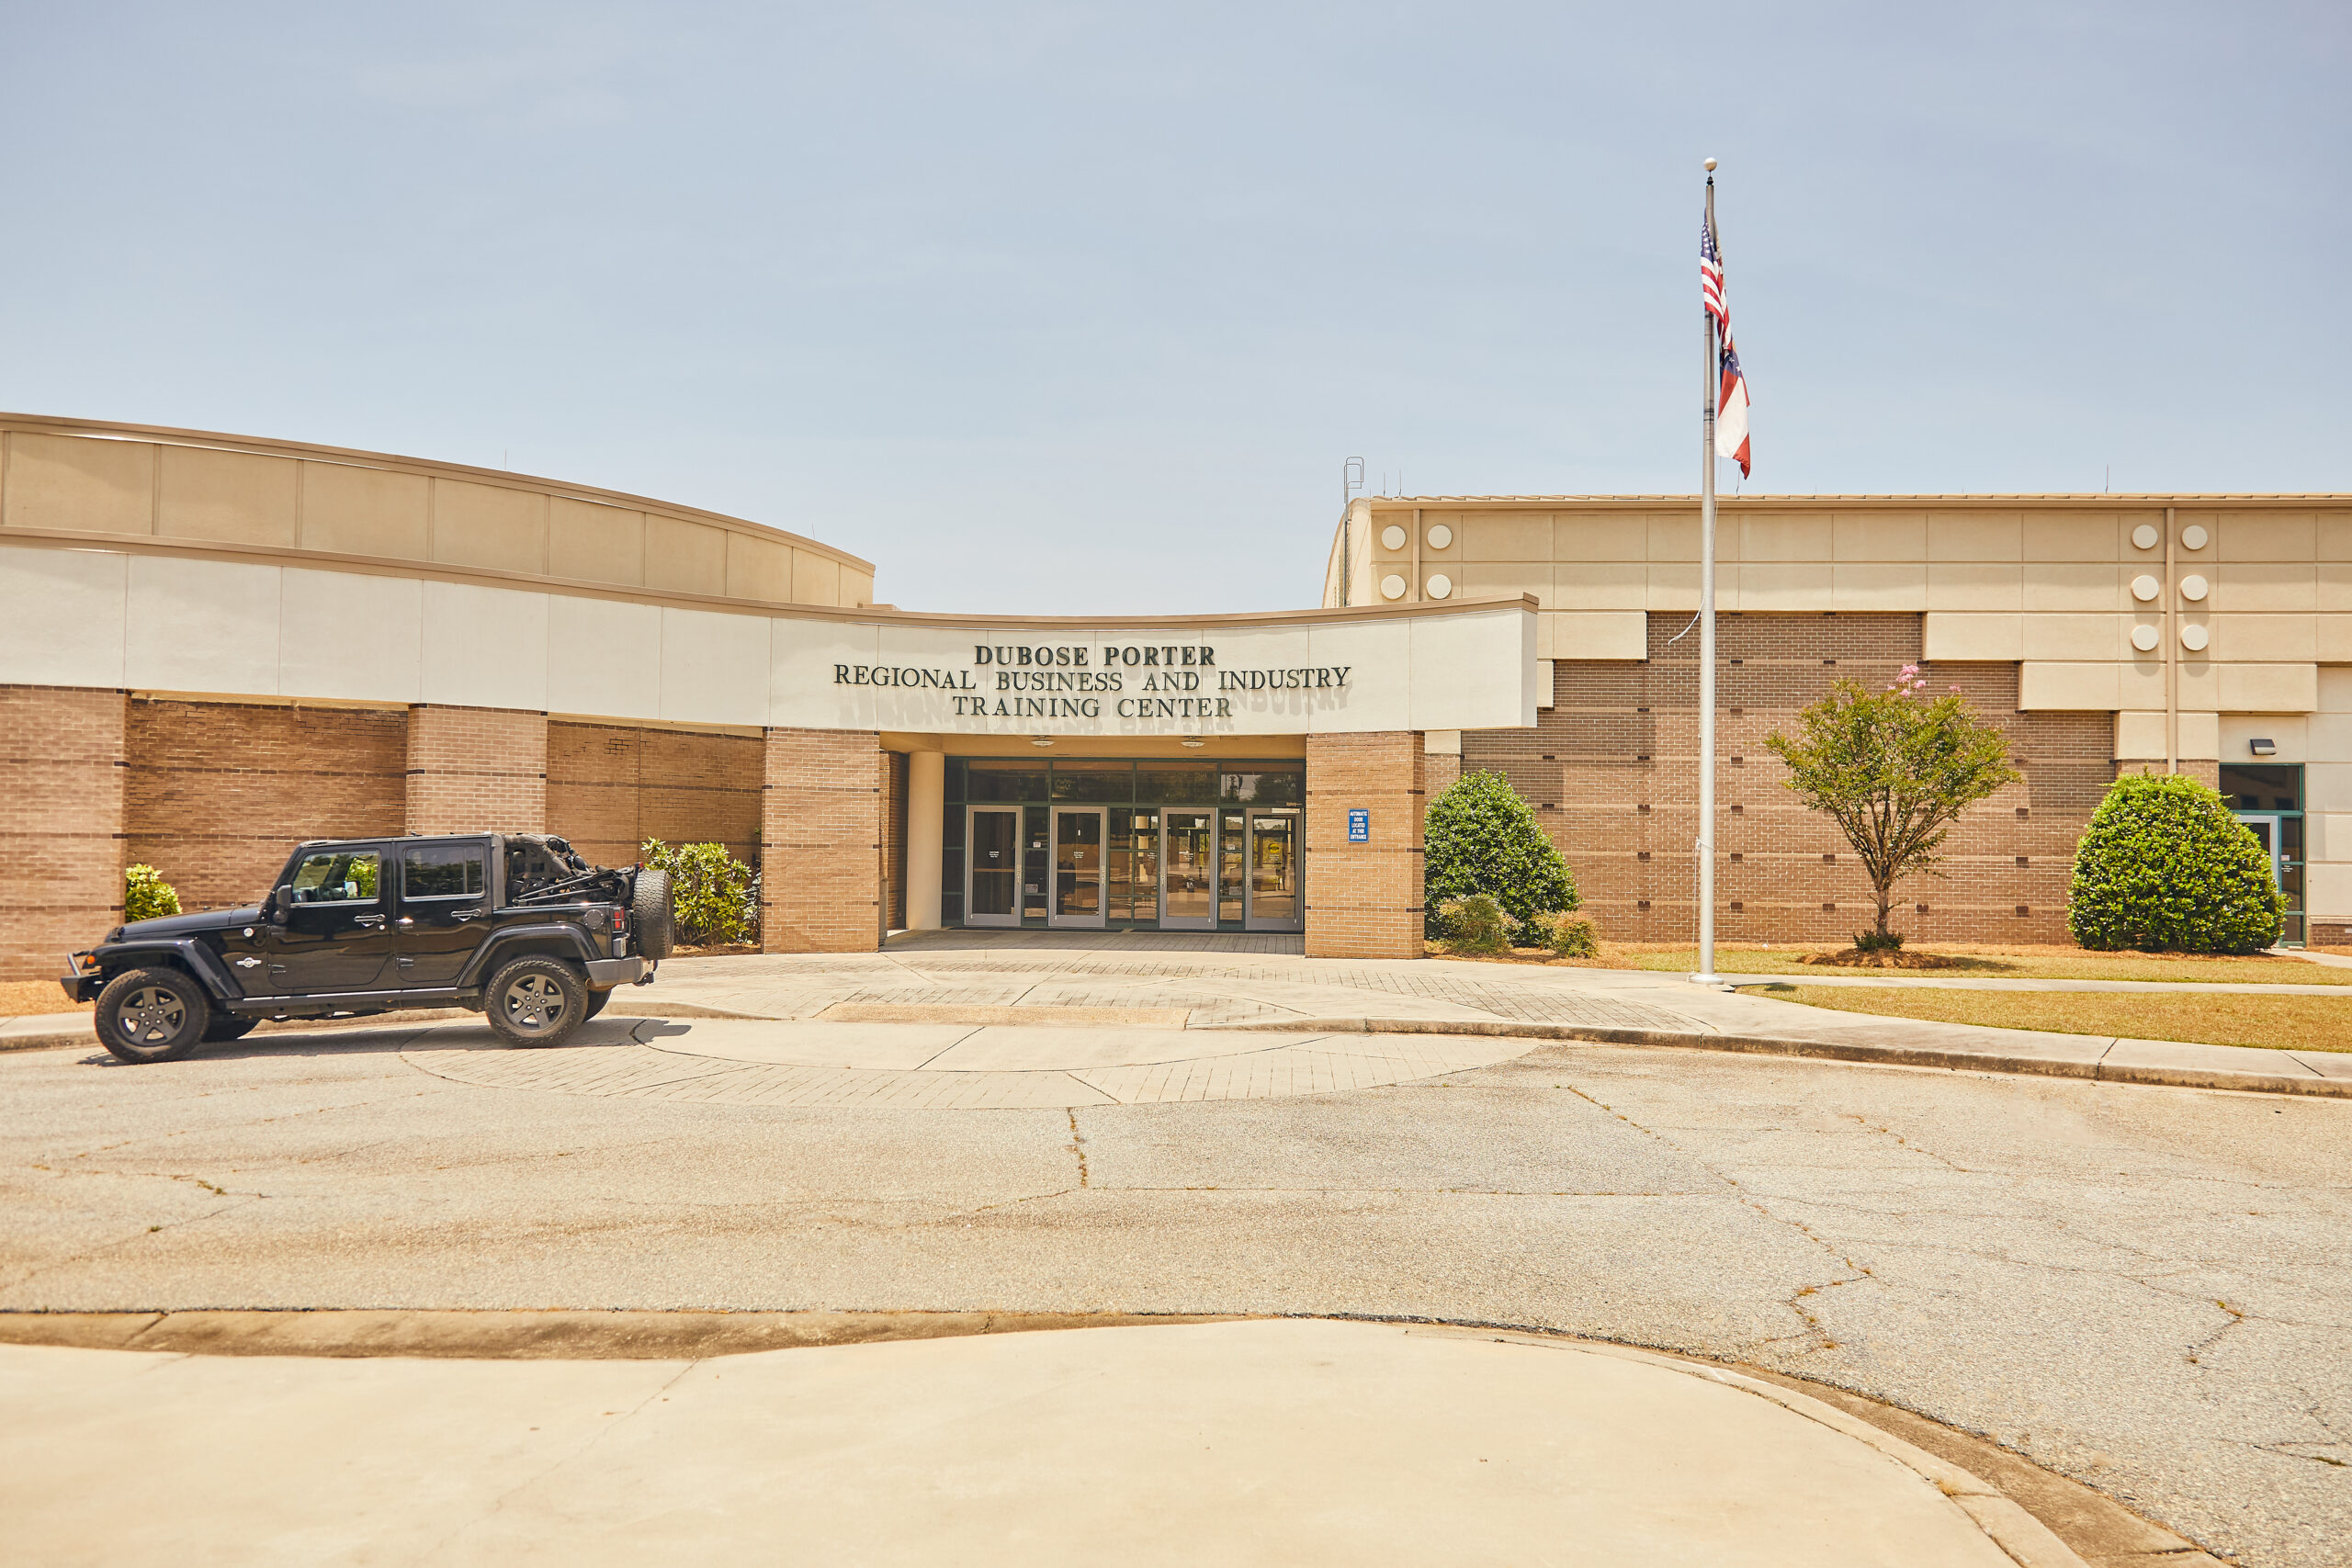 exterior view of OFTC Conference Center, with a black jeep parked in front